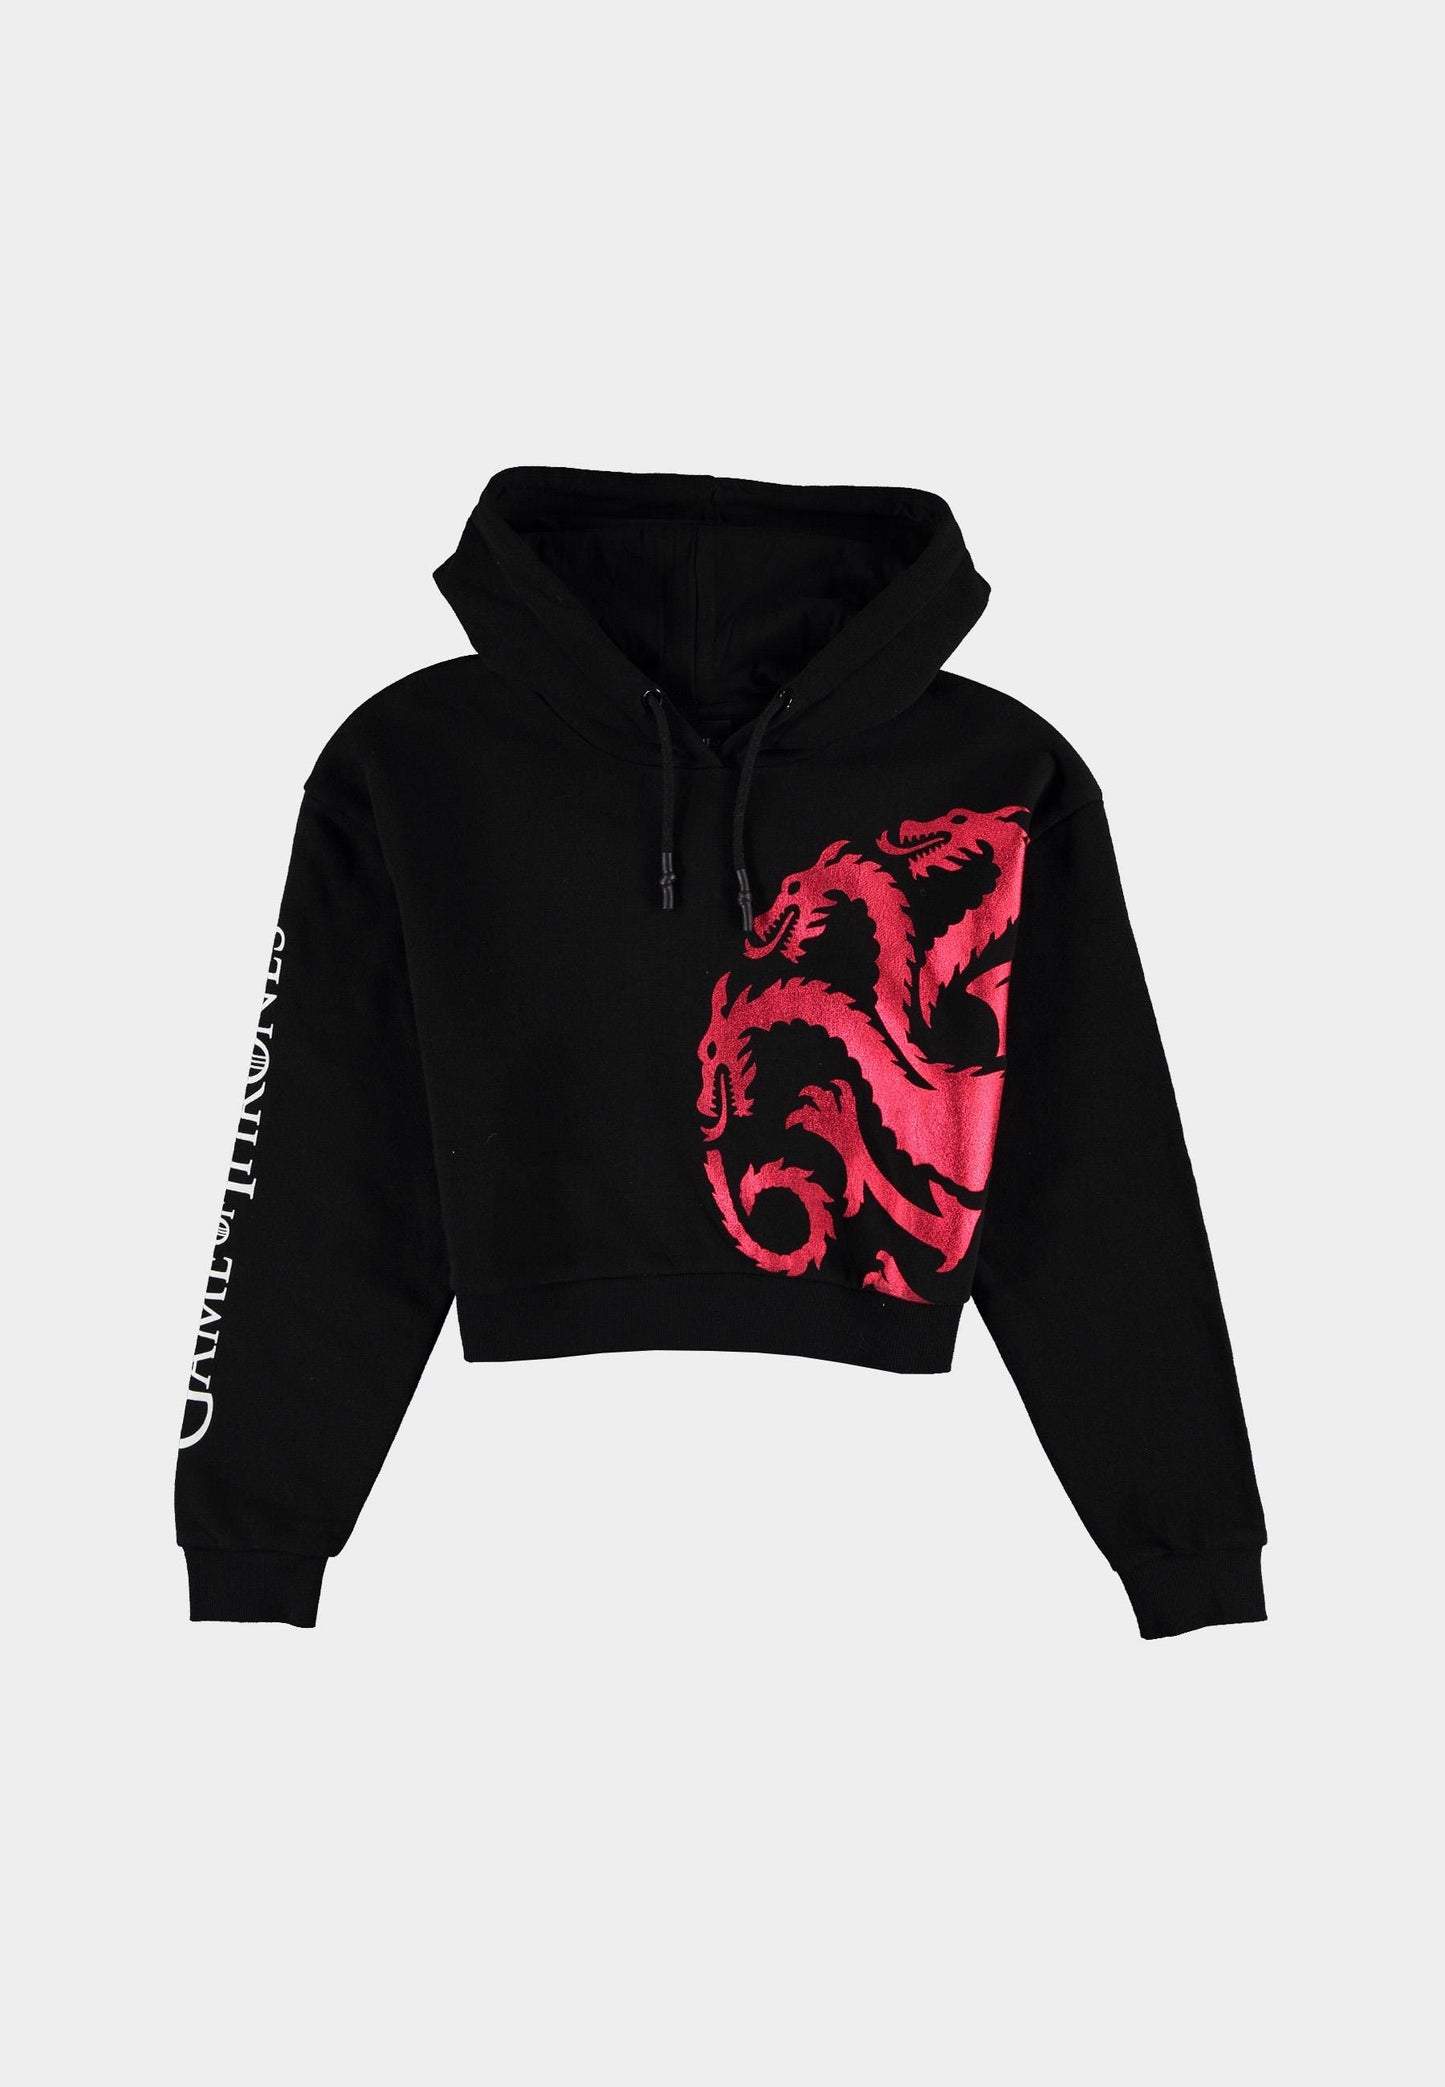 GOT - House of the Dragon - Women's Cropped Hoodie